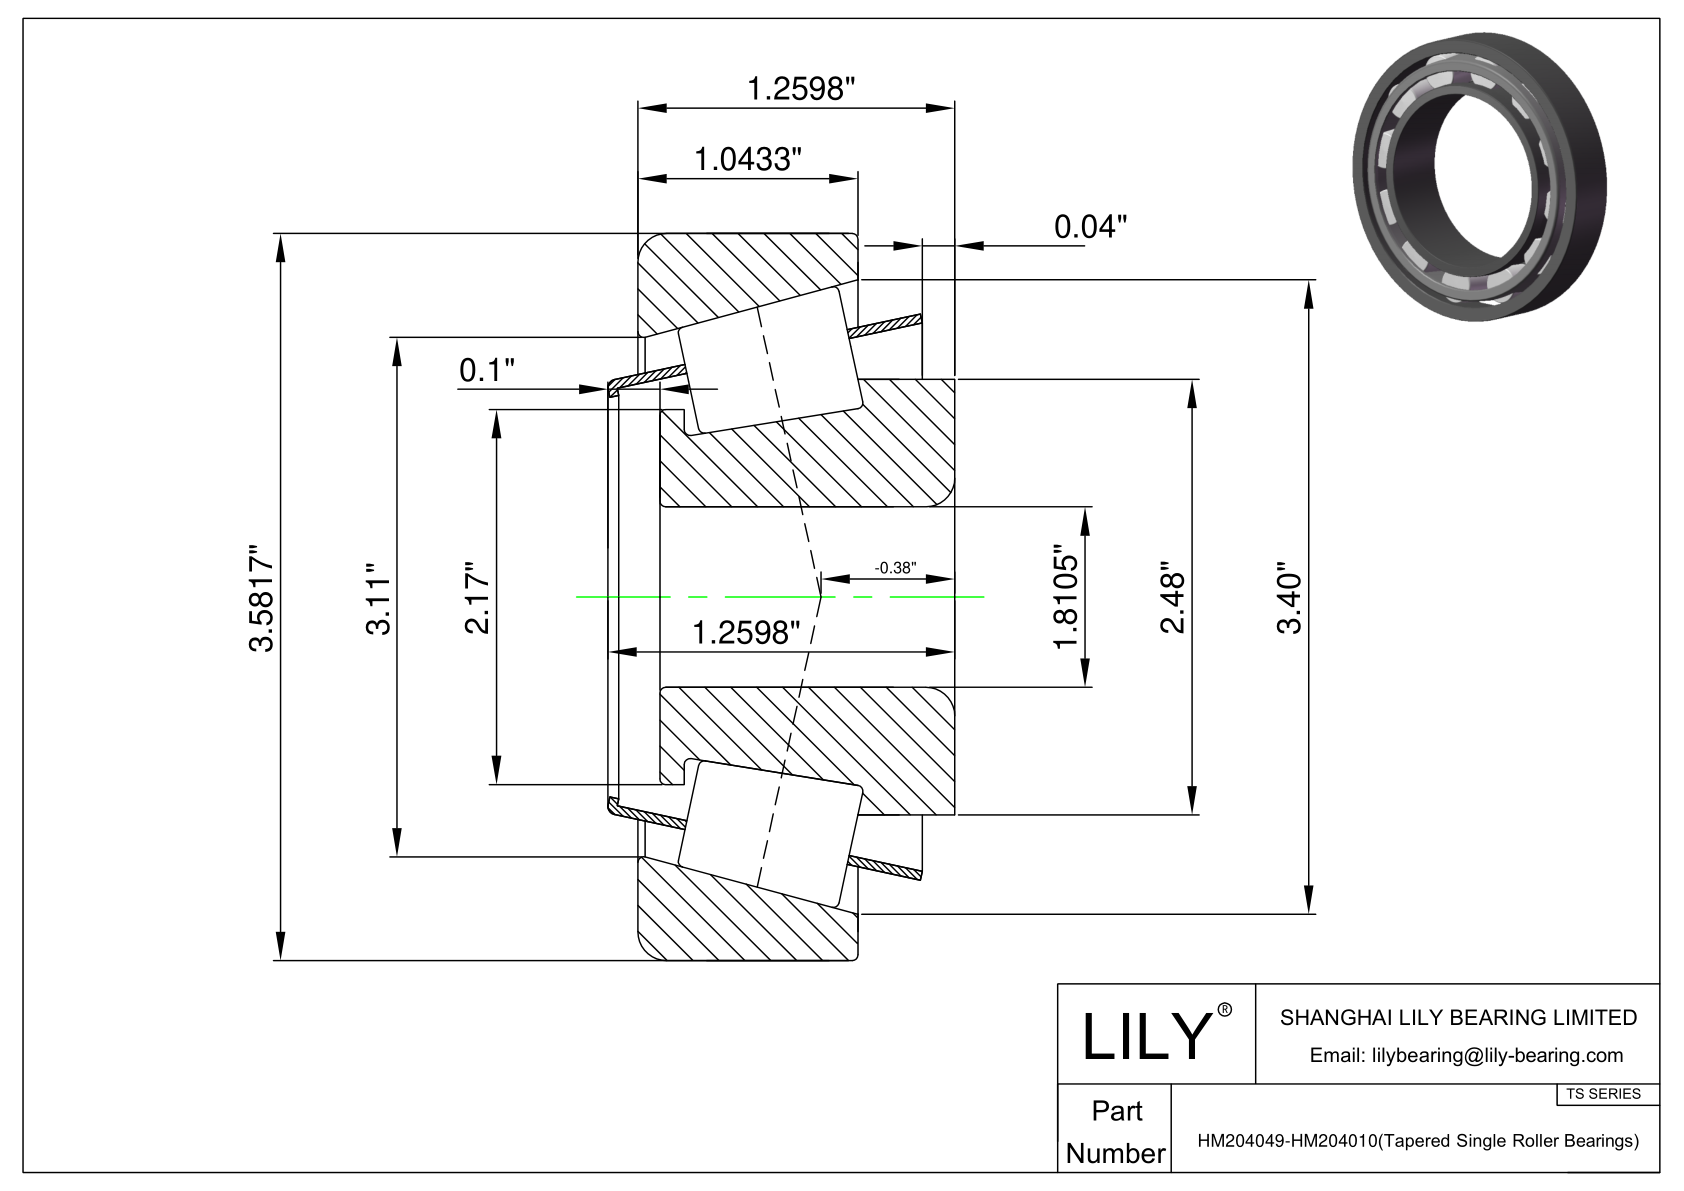 HM204049-HM204010 TS (Tapered Single Roller Bearings) (Imperial) cad drawing